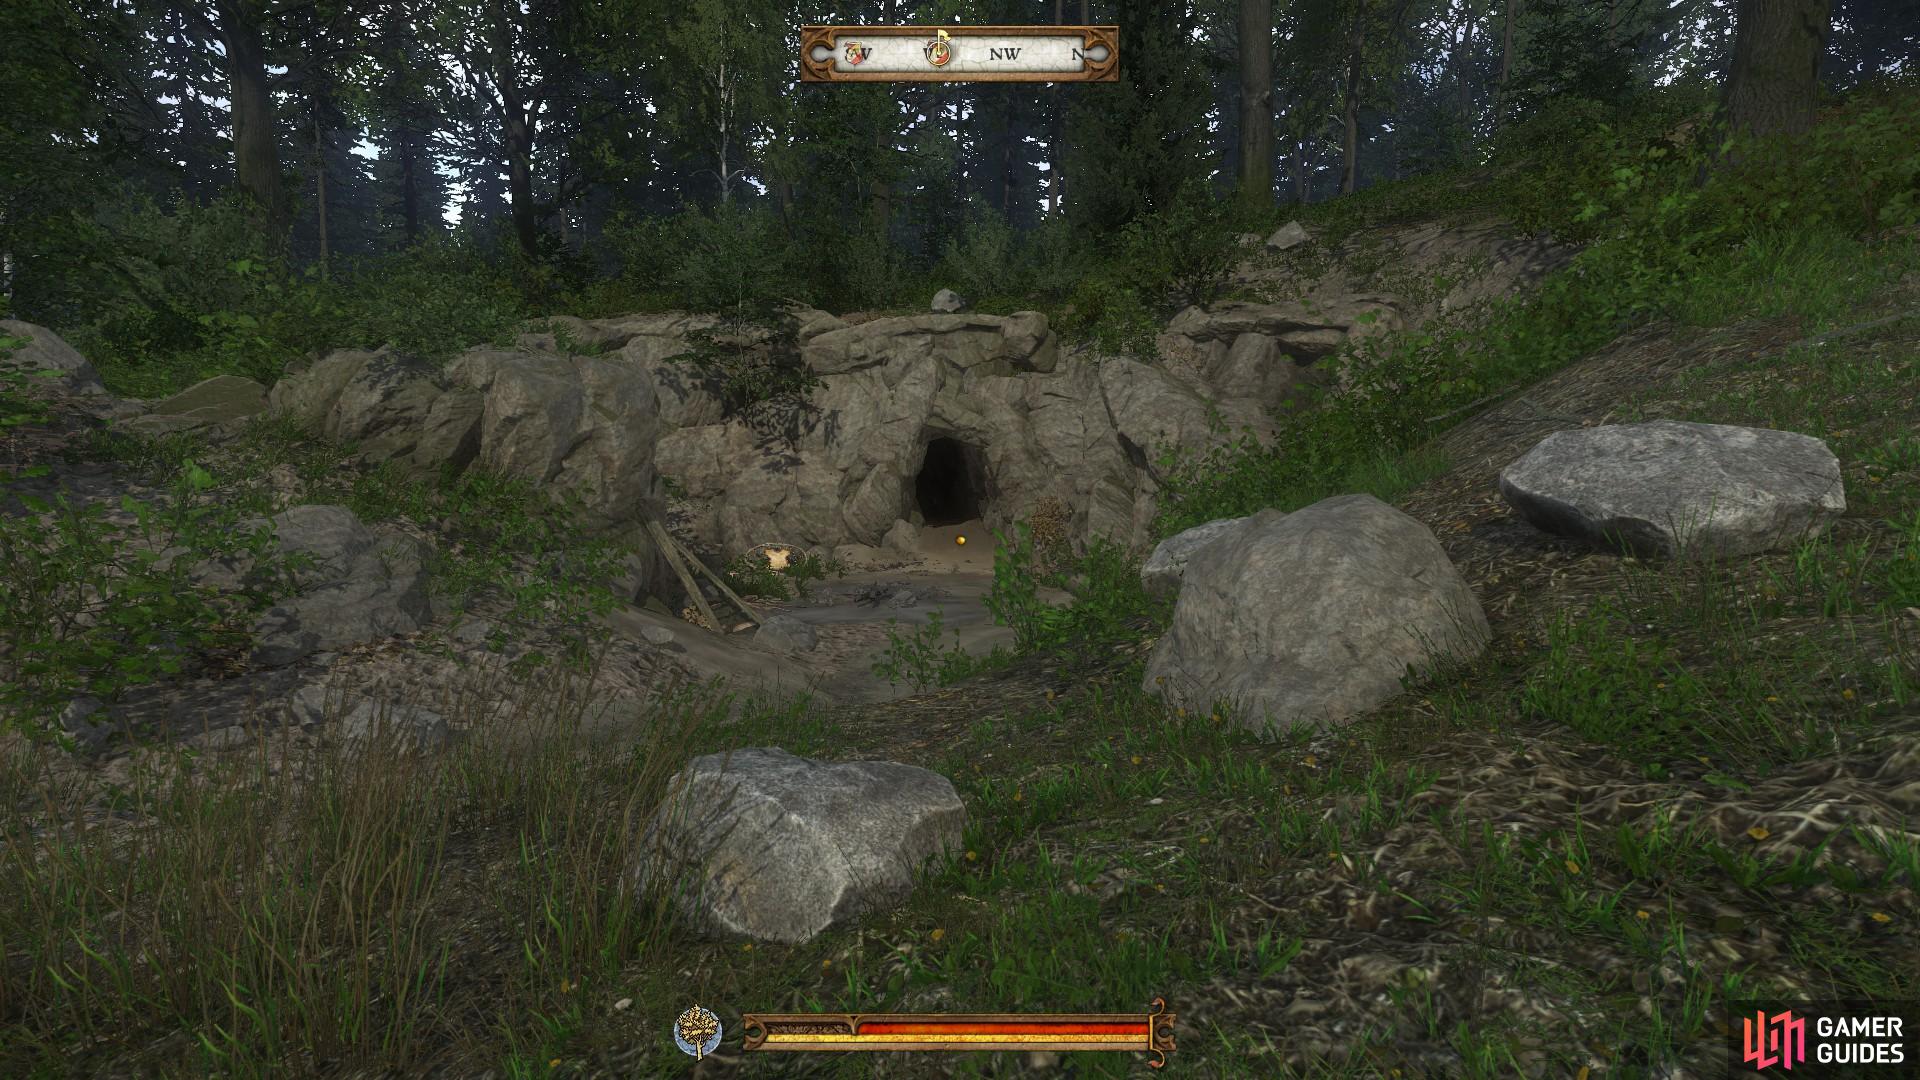 Before you enter the hideout, be sure to equip heavy armour and your weapon of choice.